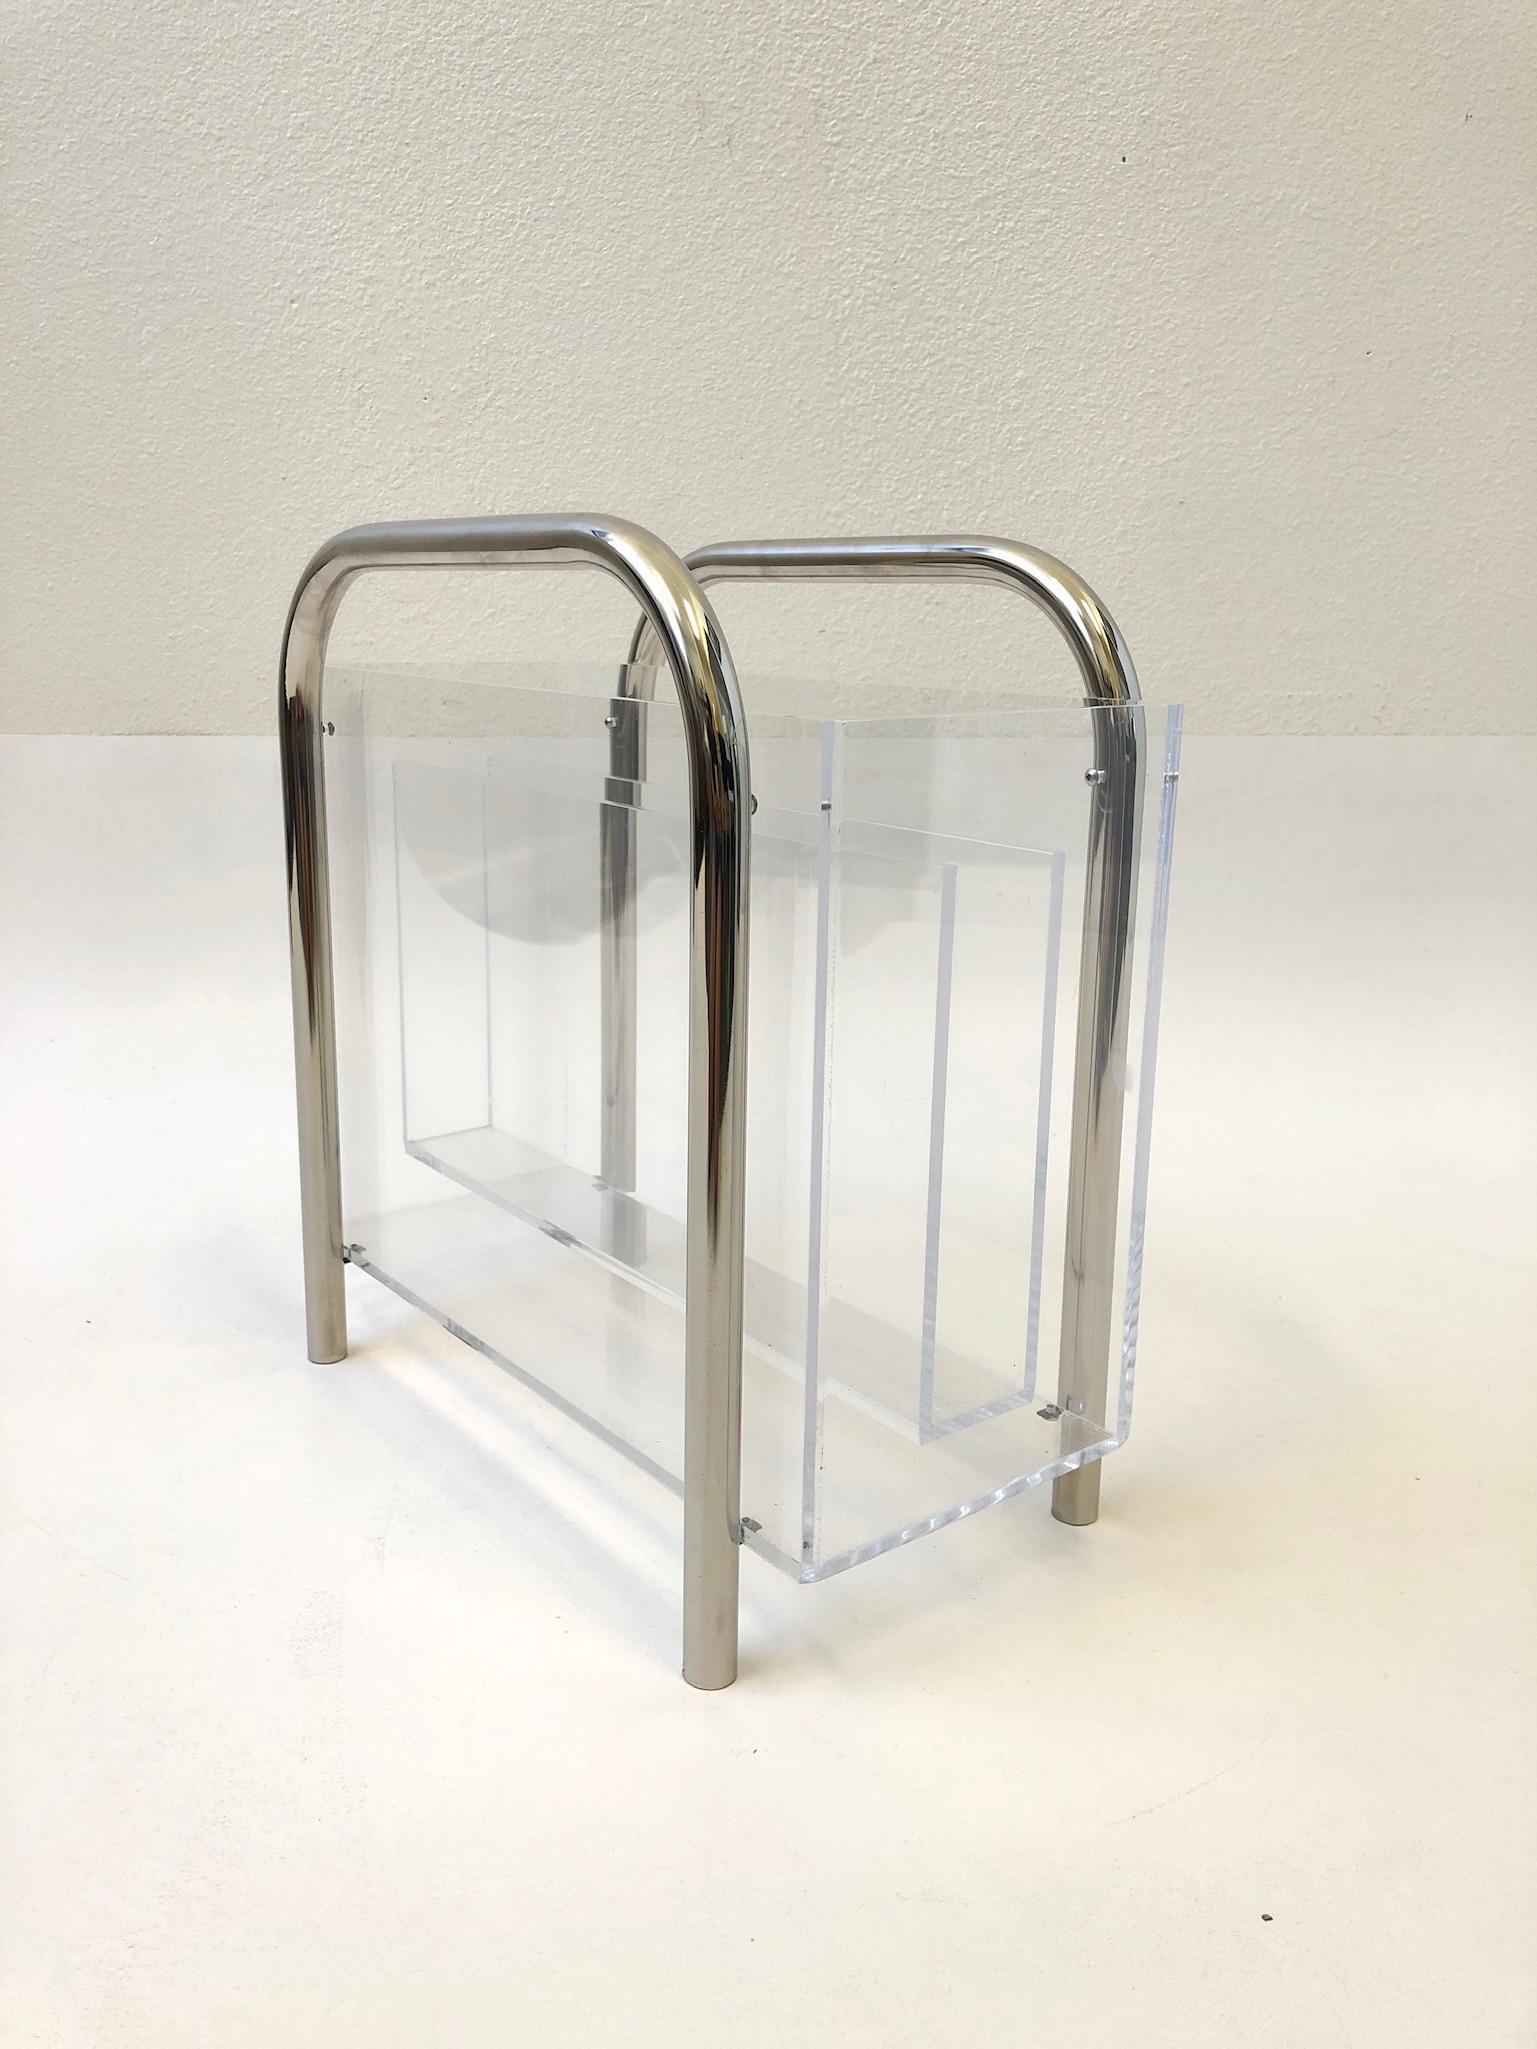 A glamorous polish chrome and clear Lucite magazine holder design by “Mr Lucite” Charles Hollis Jones in the 1970s. The Lucite shows minor wear consistent with age. Book not included.
Dimensions: 8” deep 15.5” wide 15.5” high.